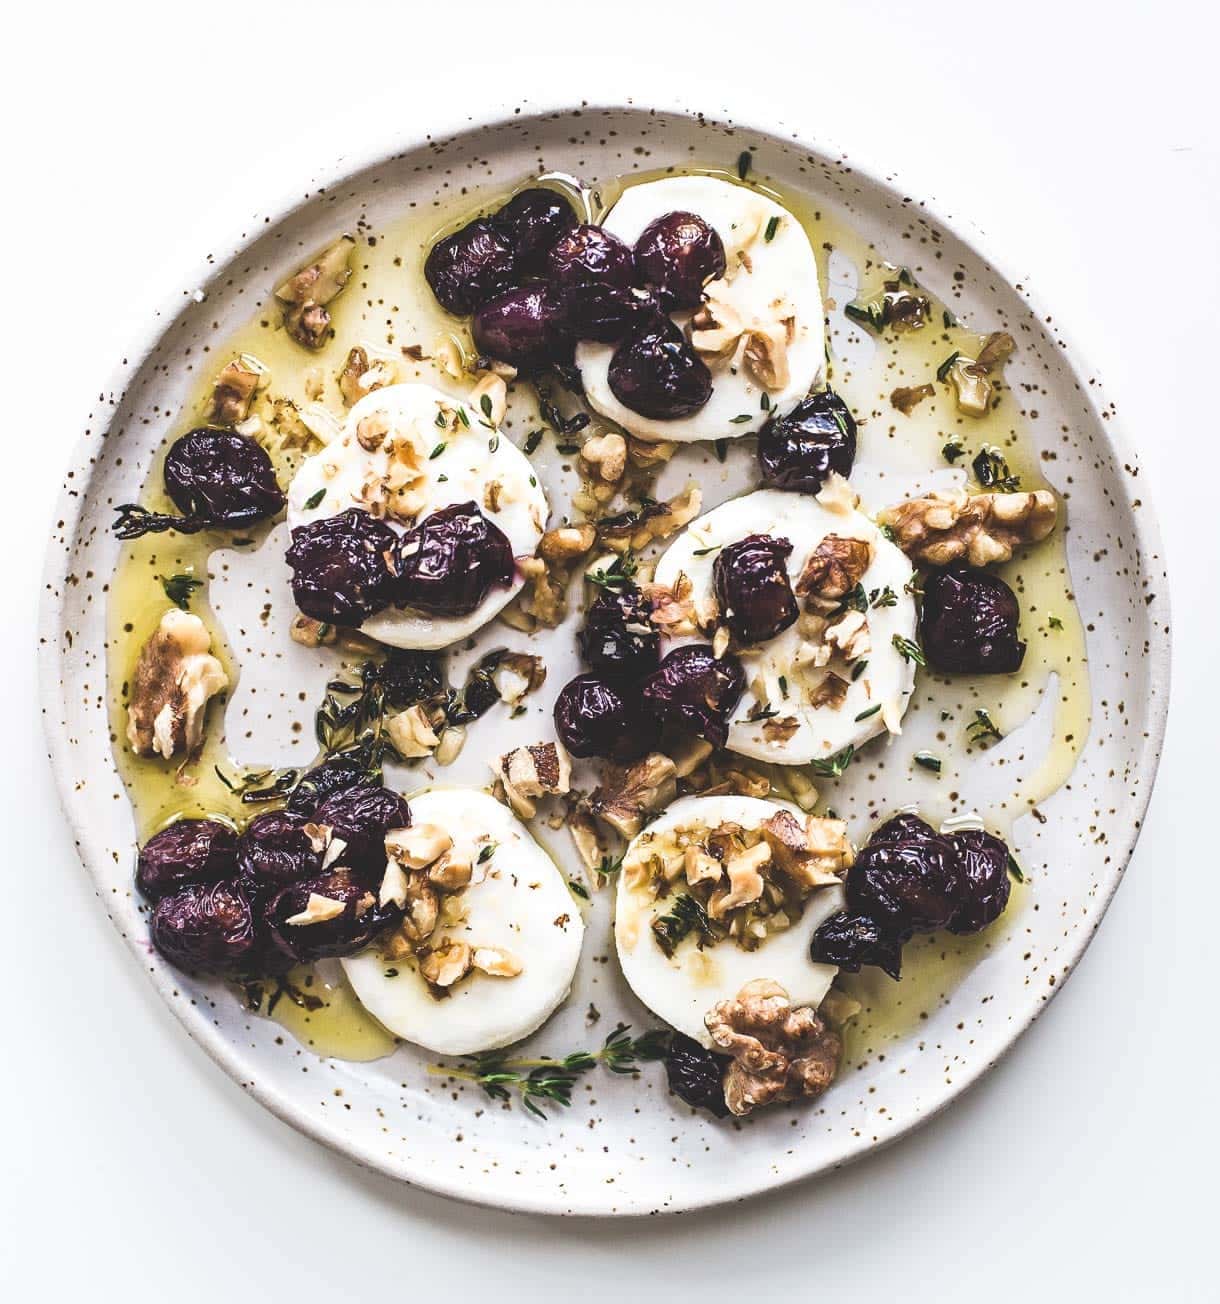 Marinated Goat Cheese with Roasted Grapes and Walnuts